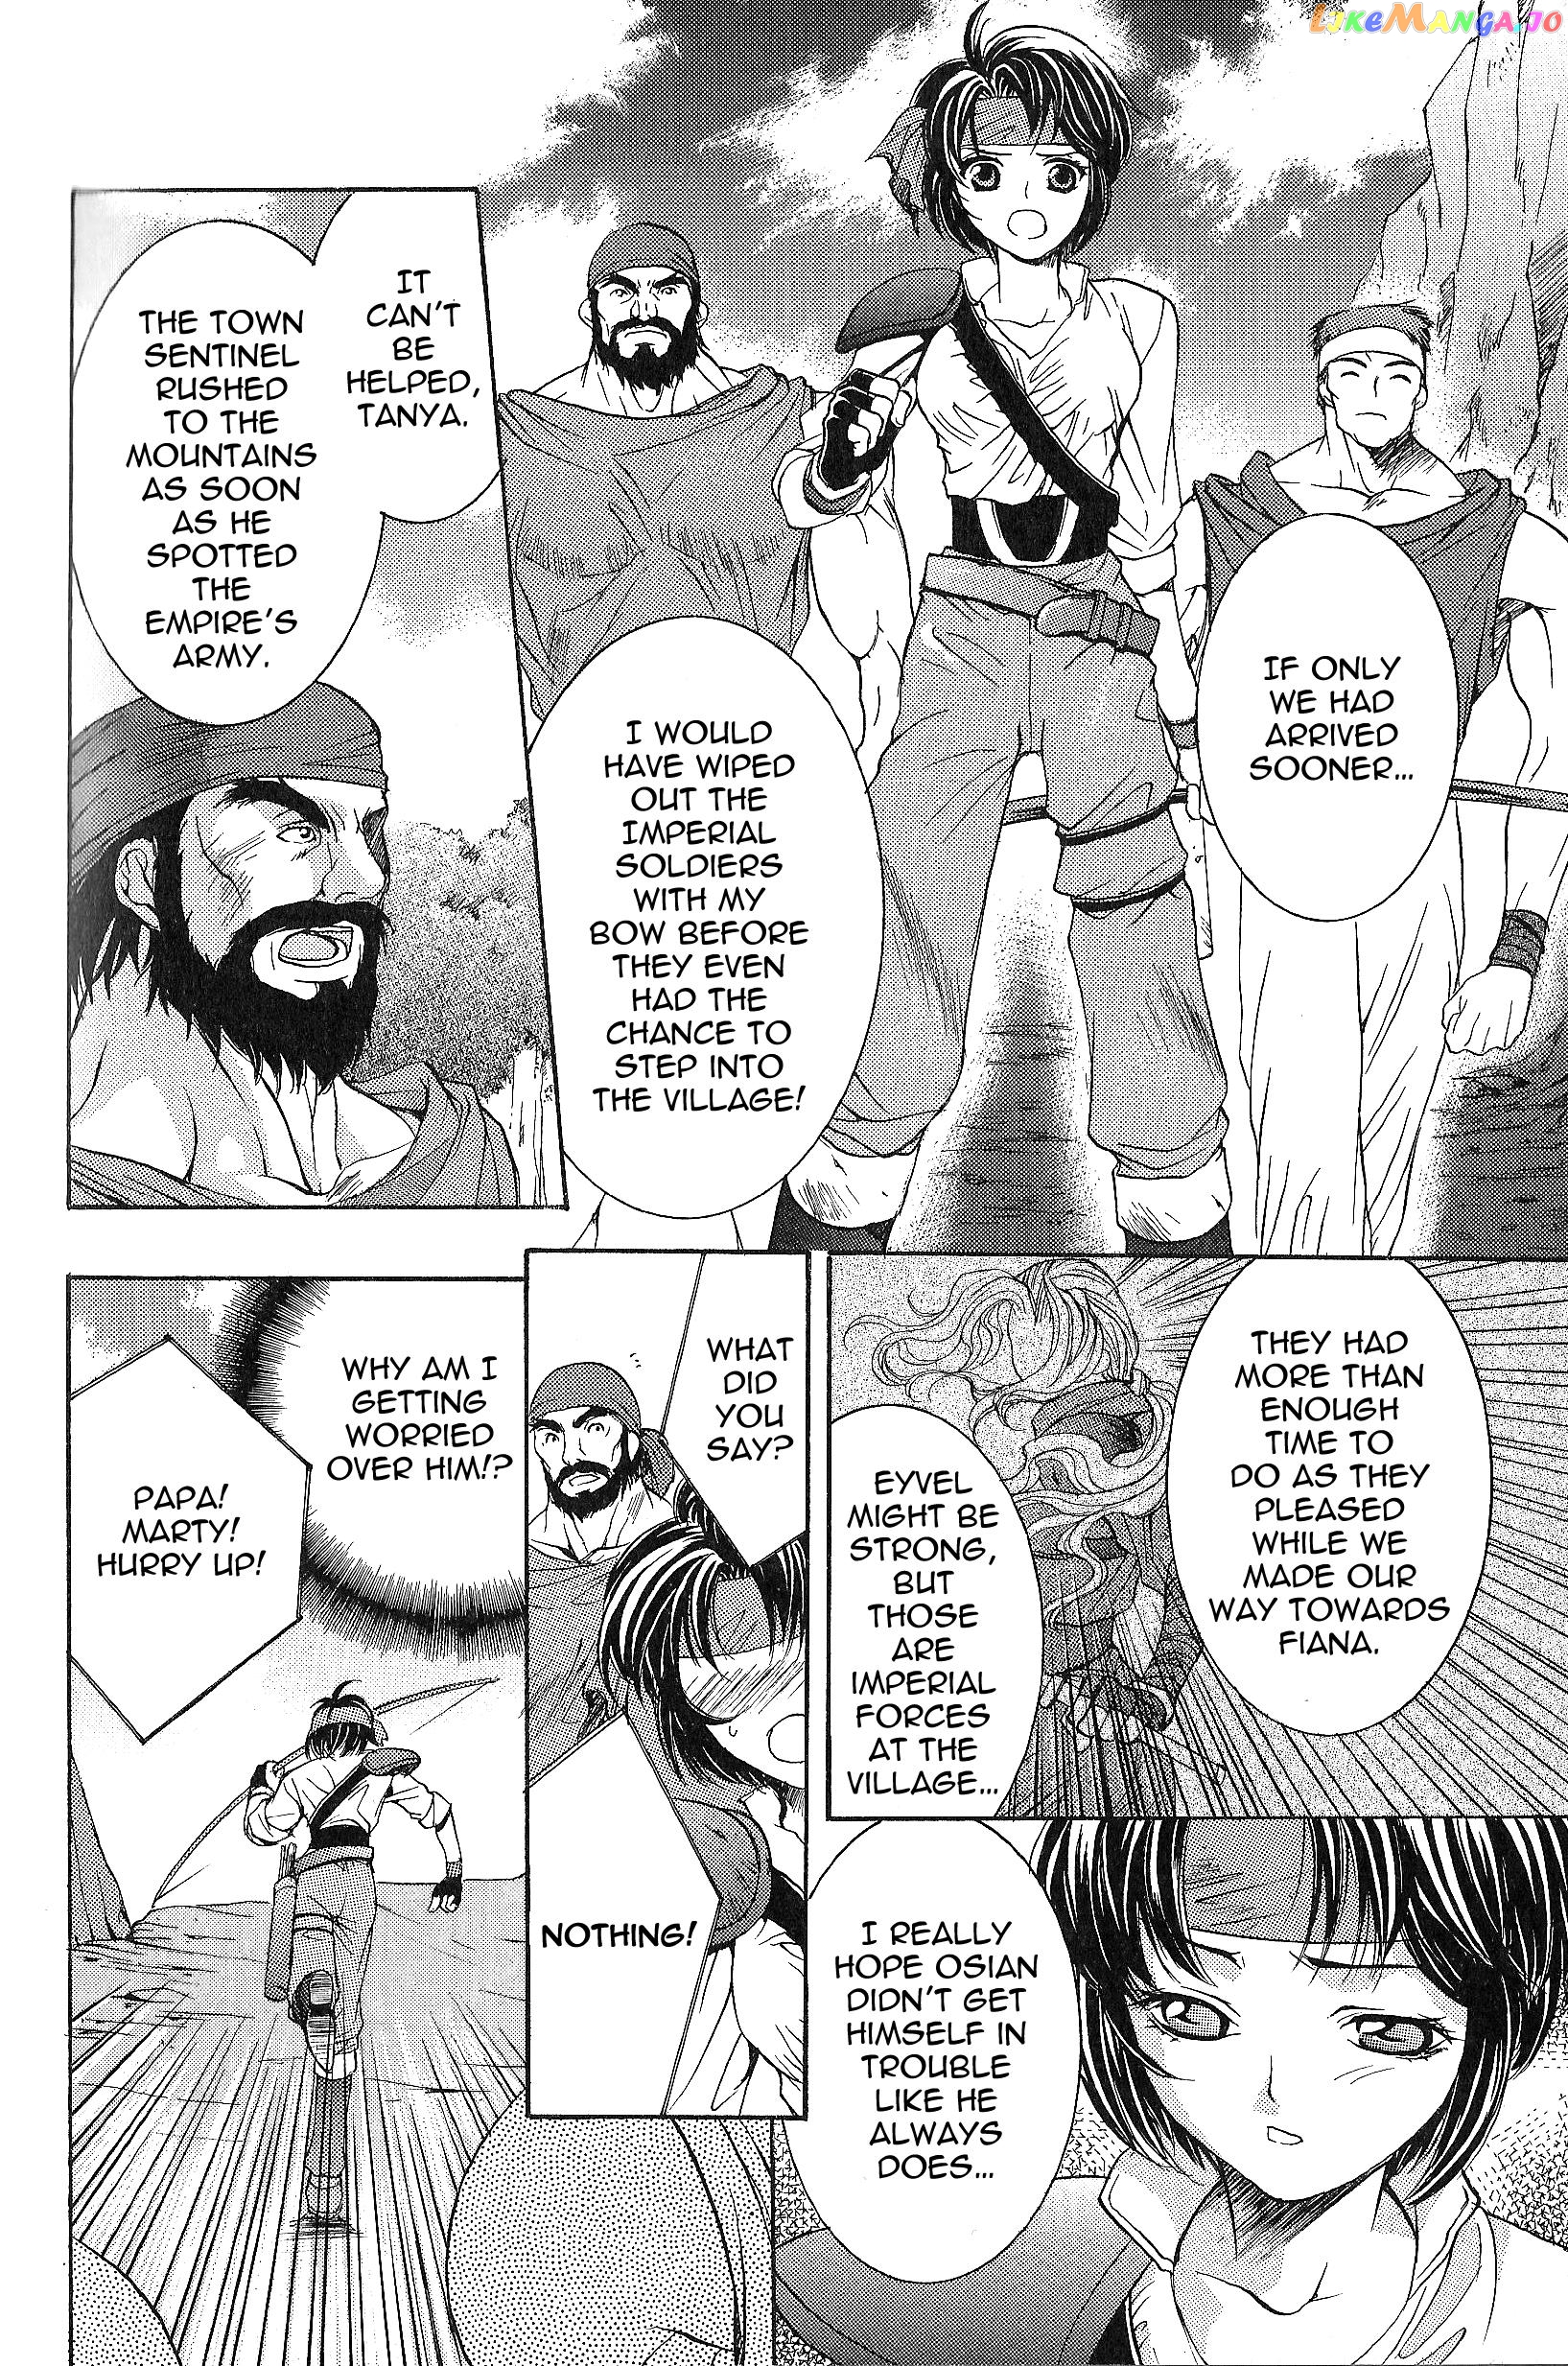 Fire Emblem - Thracia 776 vol.1 chapter 2 - page 6